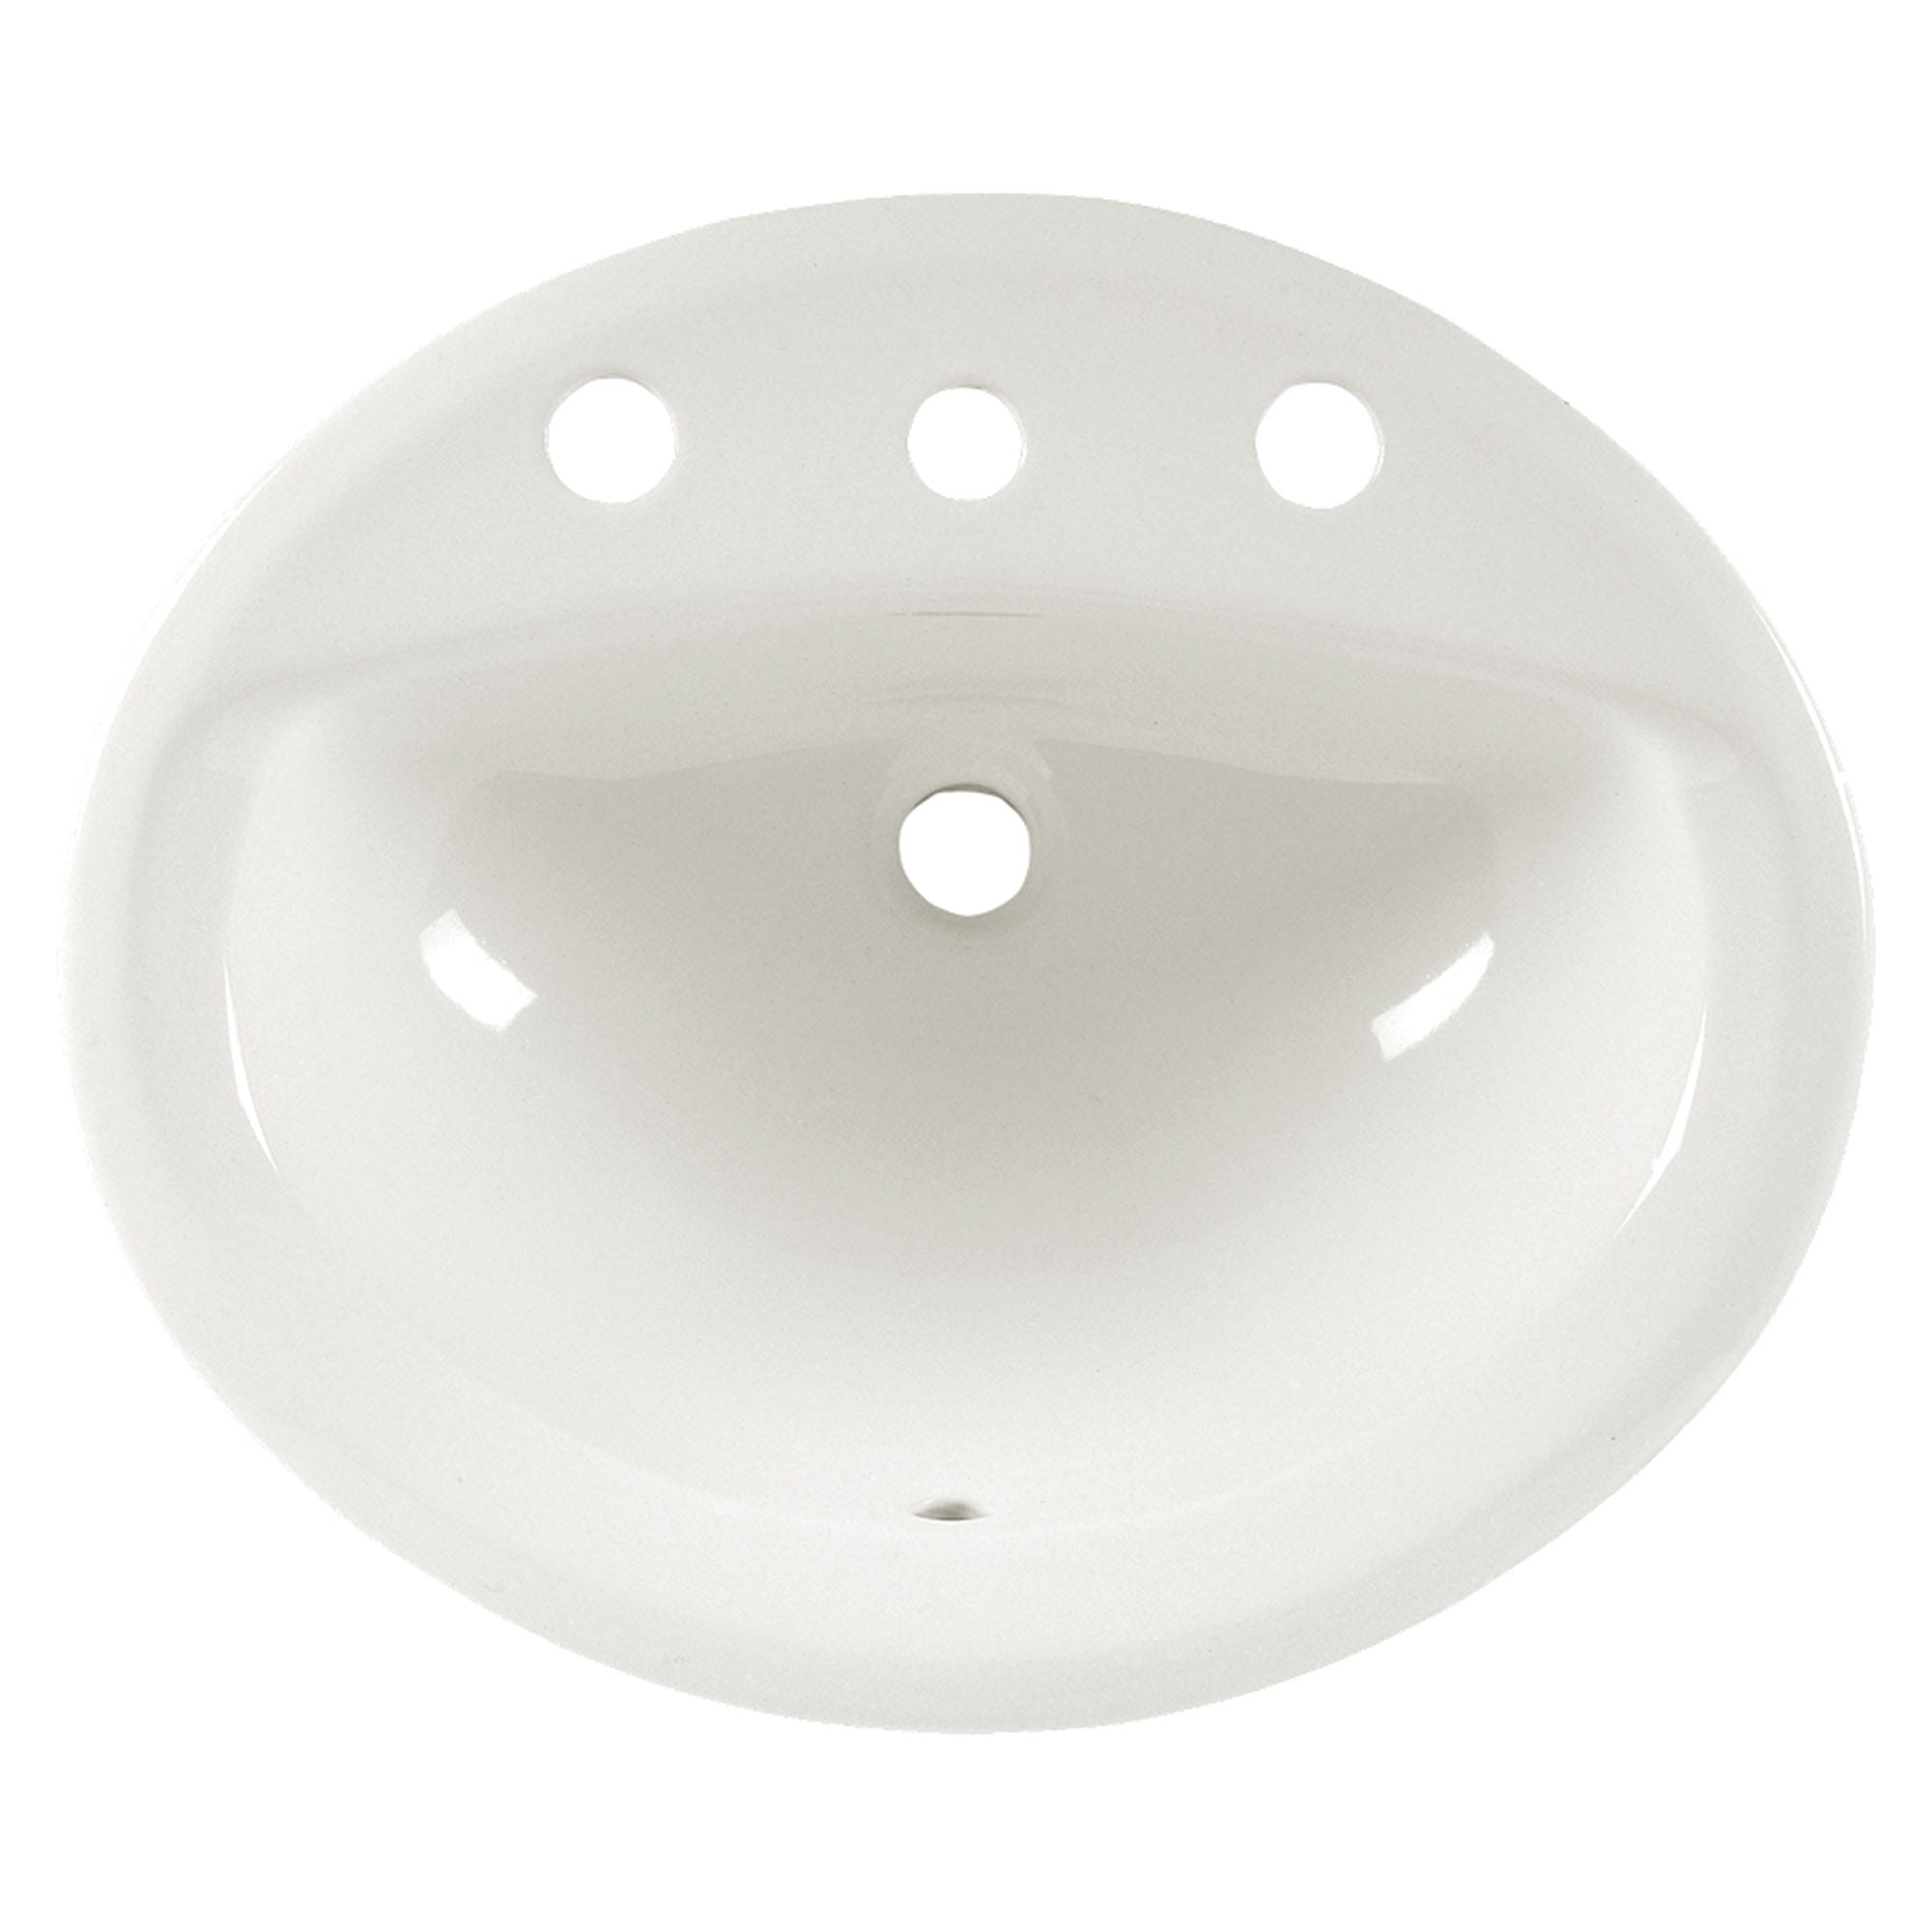 Aqualyn Drop In Sink With 8 Inch Widespread WHITE